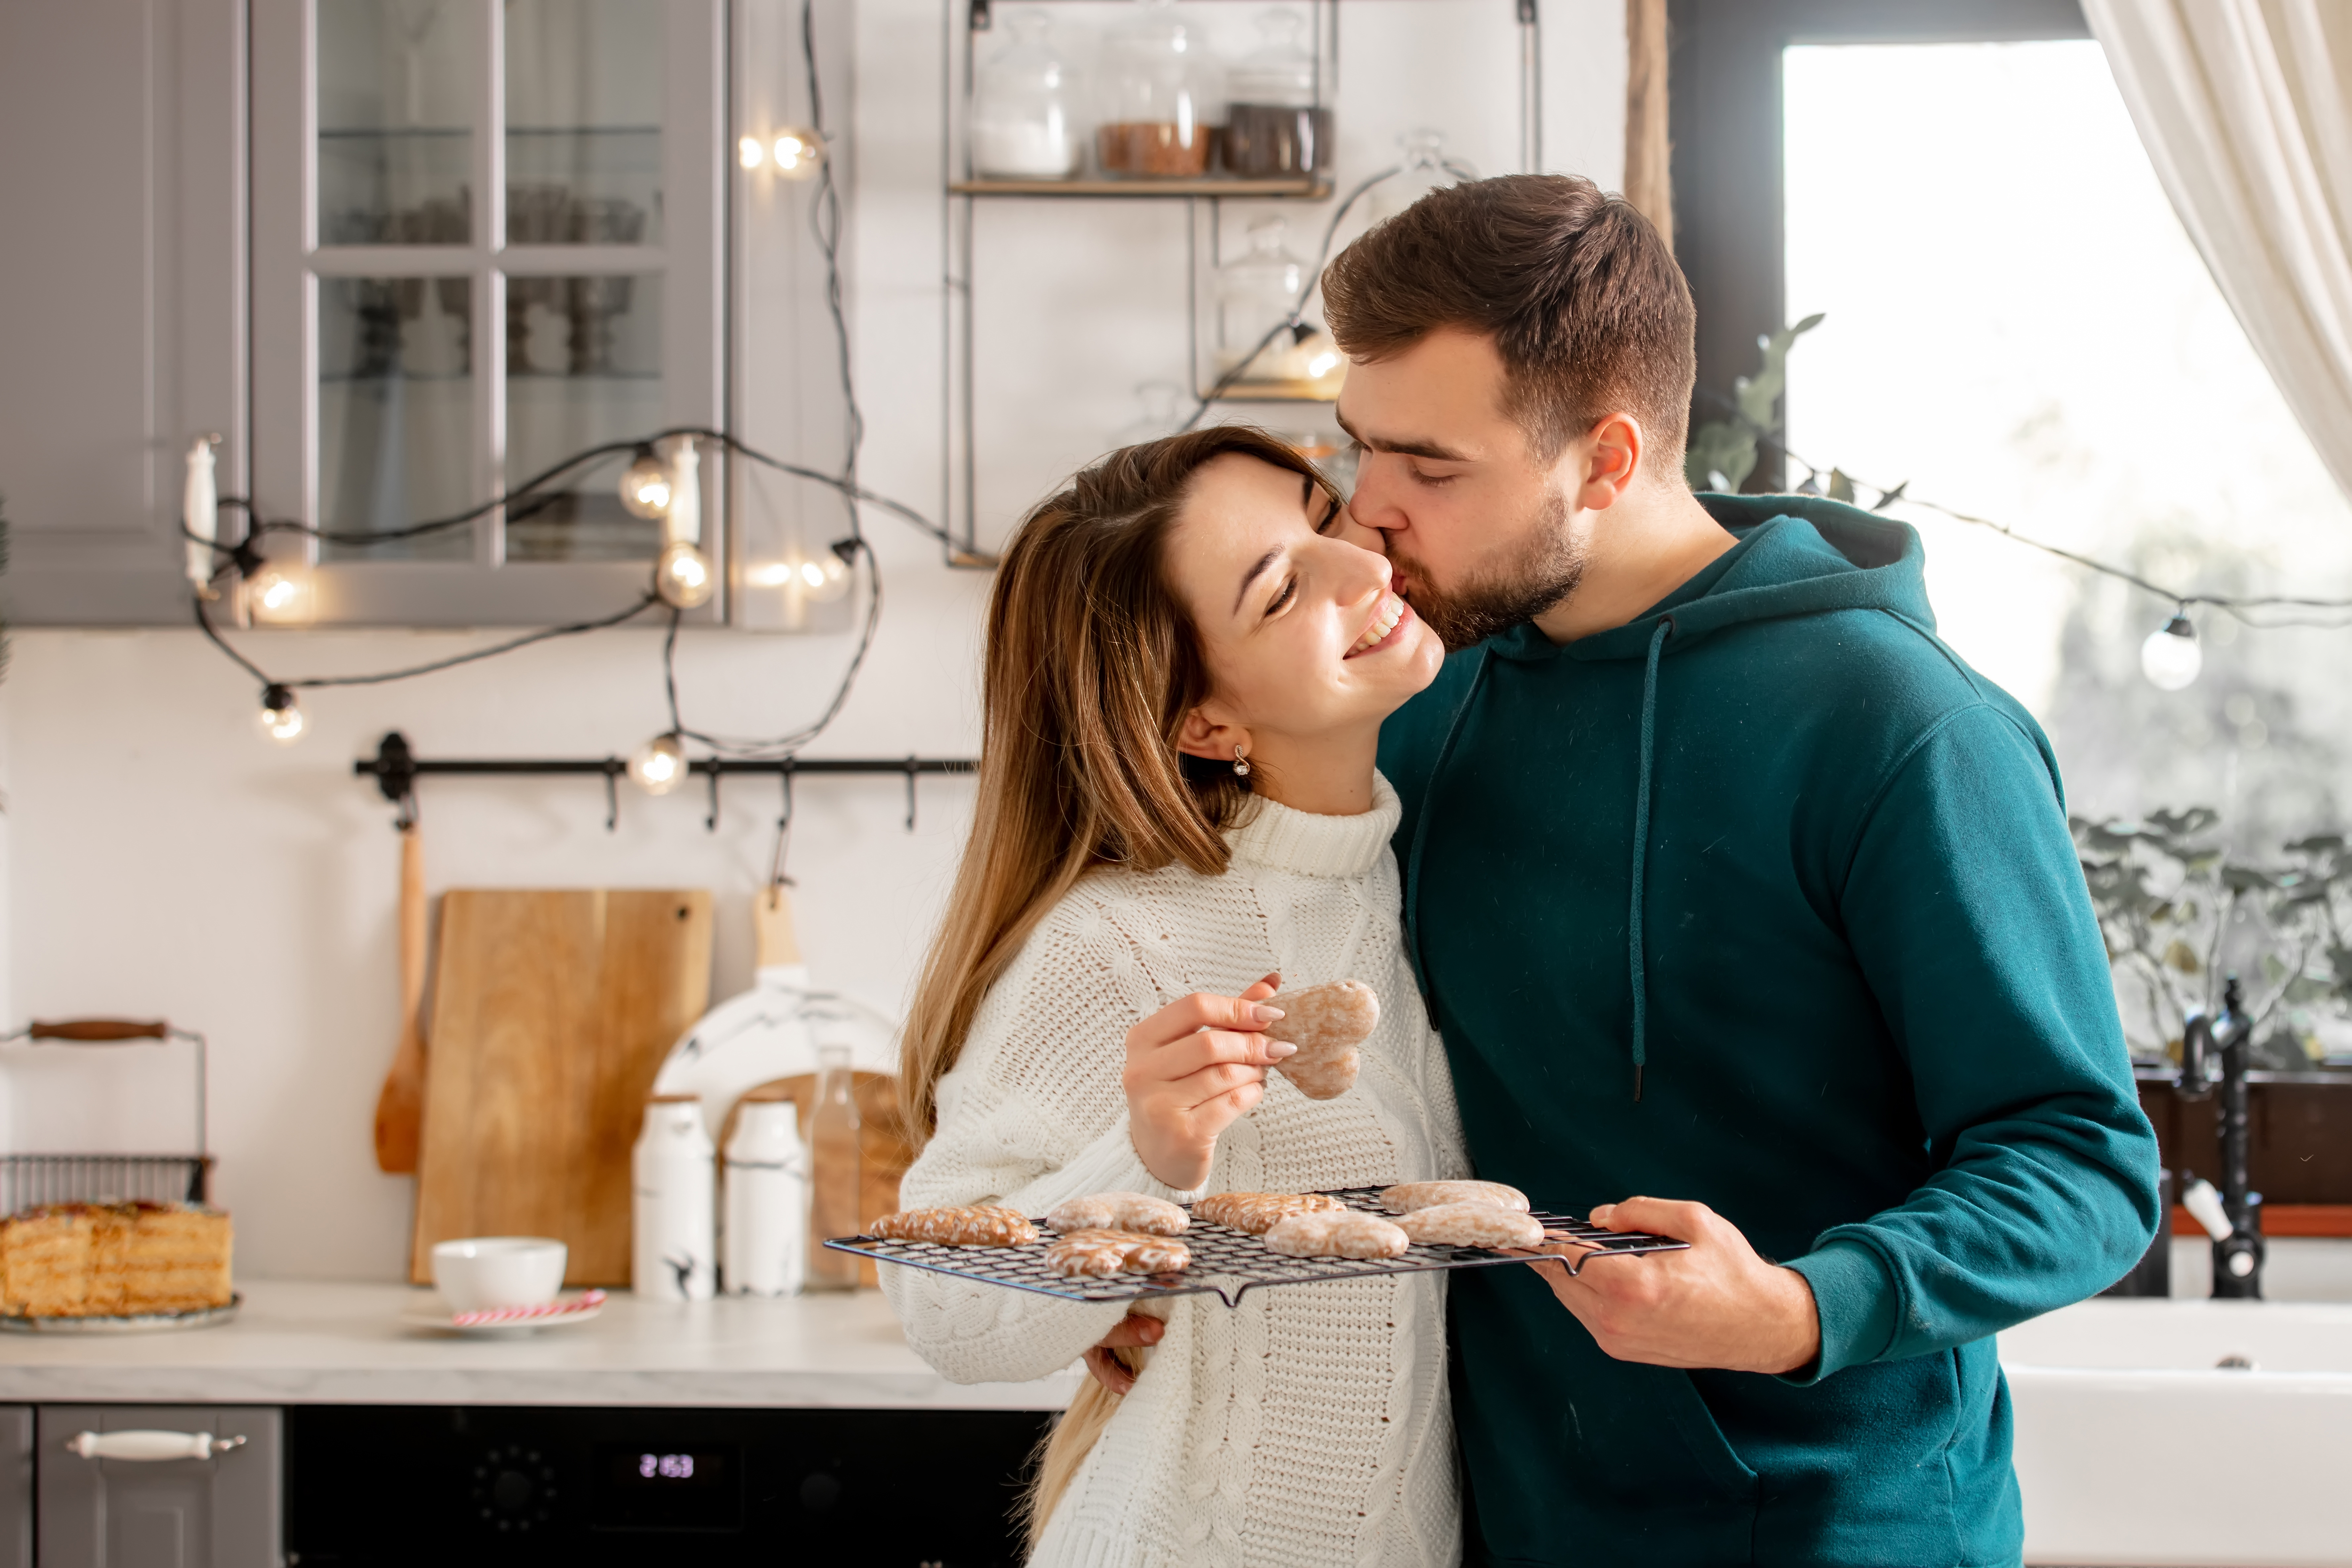 A man kisses his girlfriend while baking cookies | Source: Shutterstock